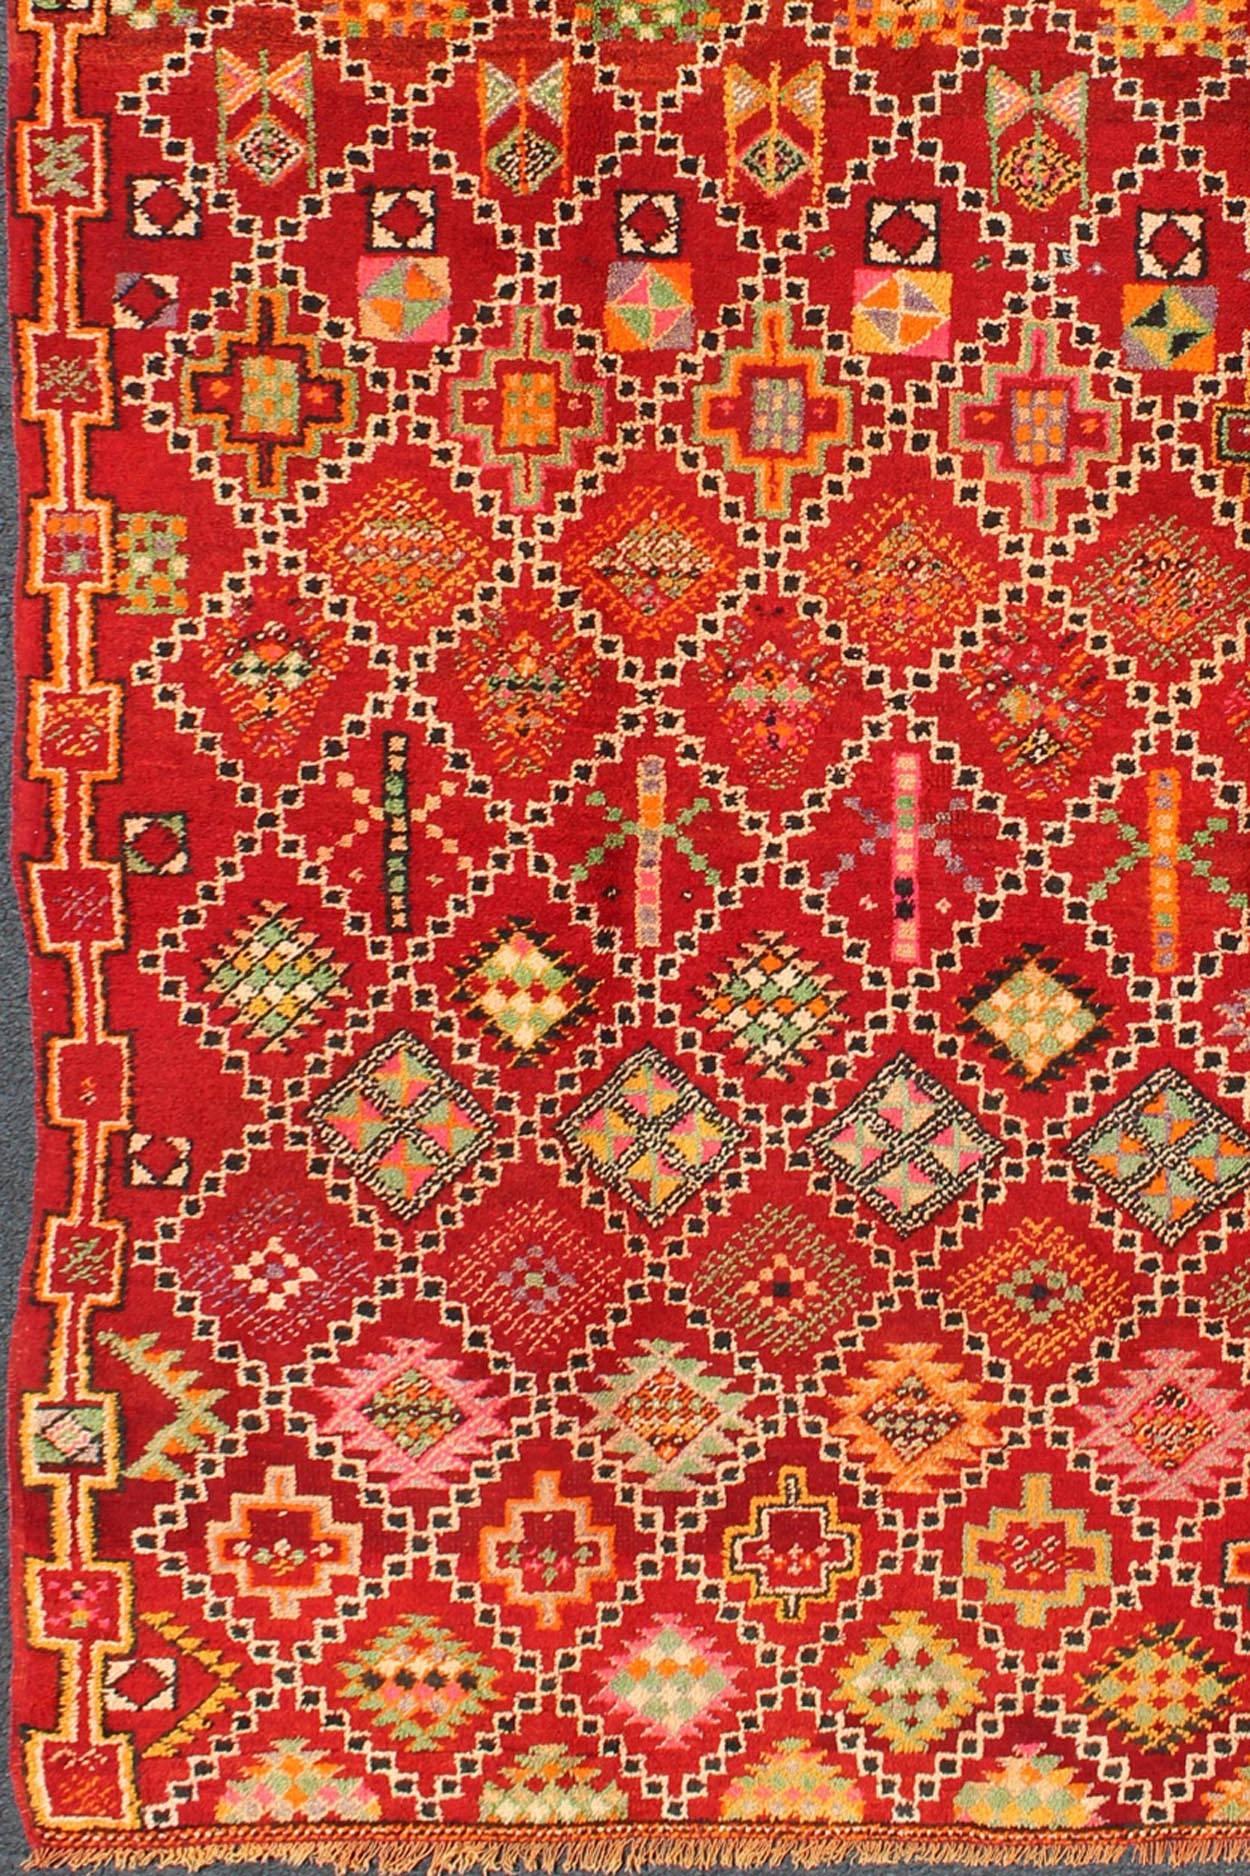 This gorgeous Vintage Moroccan carpet from the mid-20th Century displays a stunning, all-over geometric pattern and palette of rich colors. The red base of the rug holds a black & white diamond-shaped grid pattern that contains a wide variety of